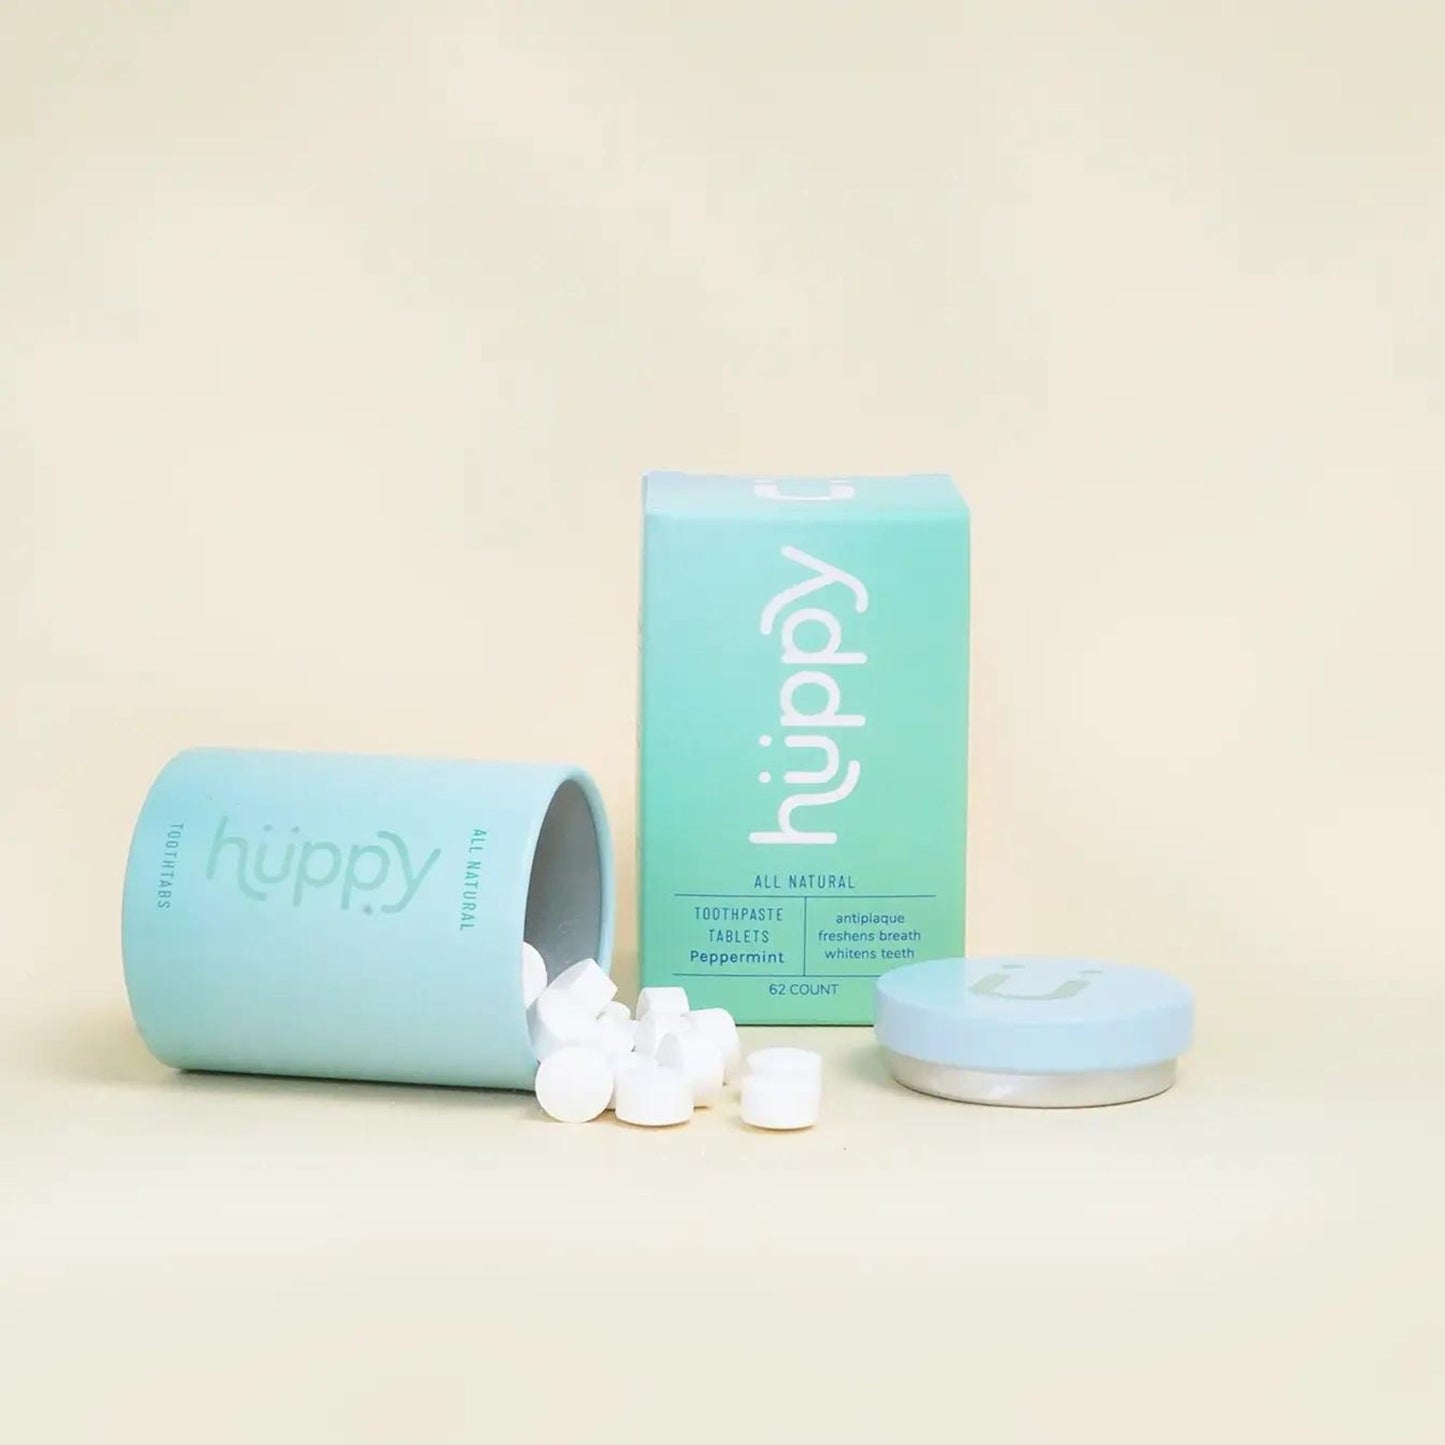 Huppy Peppermint toothpaste tablets in reusable tin